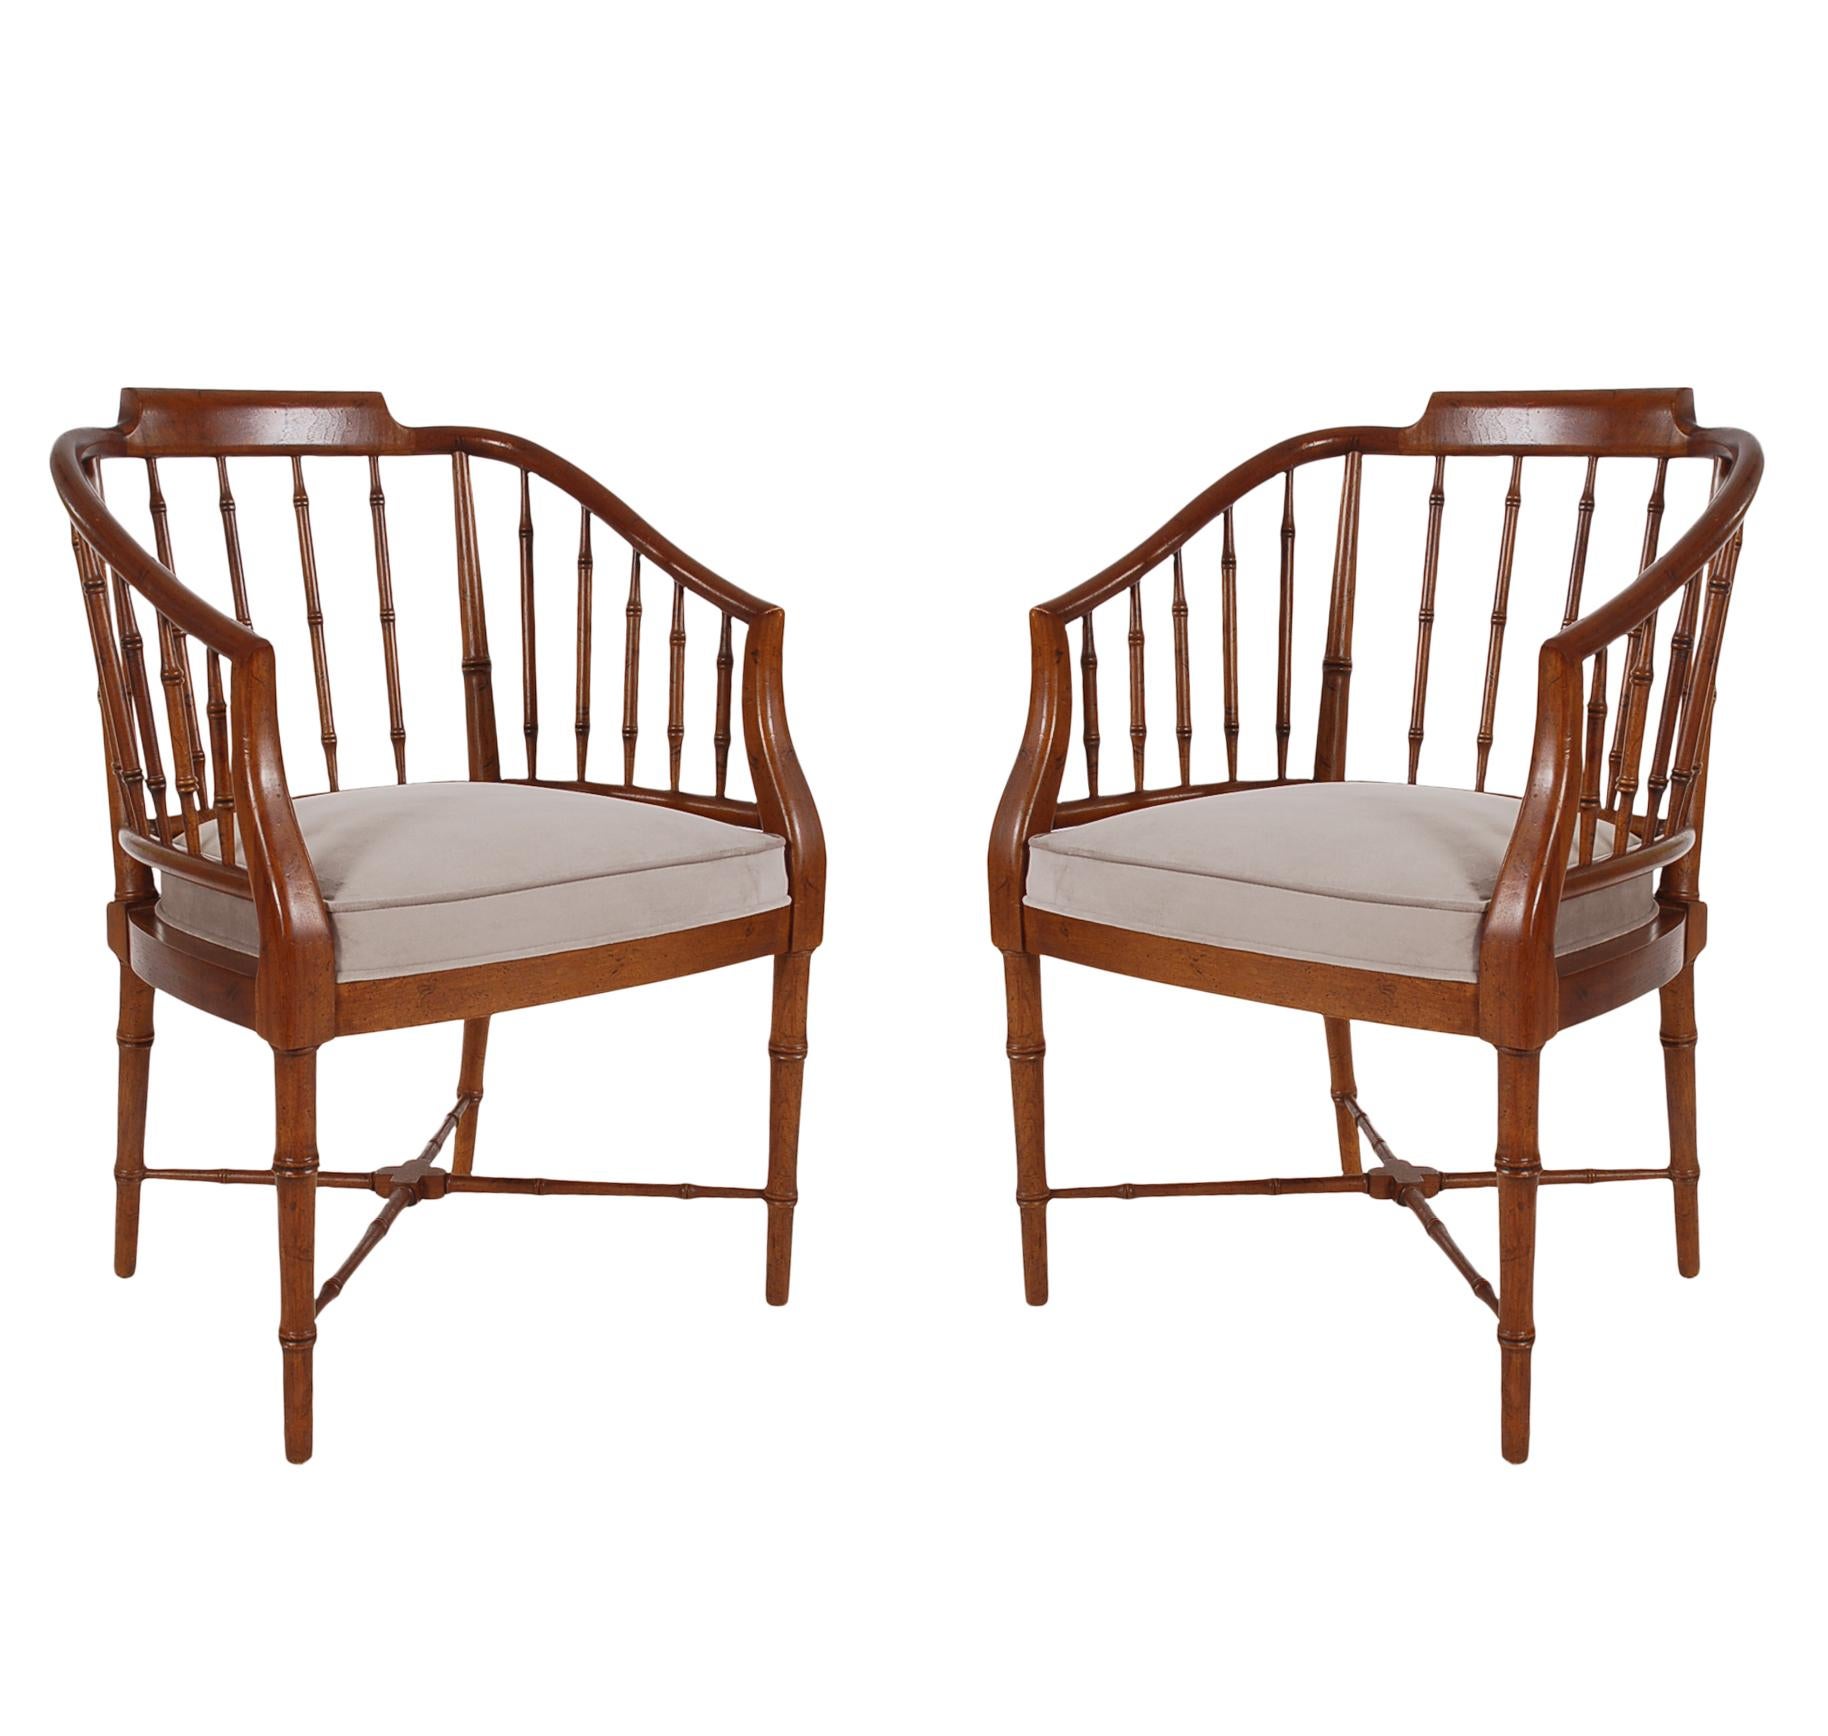 Pair of Chinoiserie Hollywood Regency Faux Bamboo Armchairs in Walnut by Baker